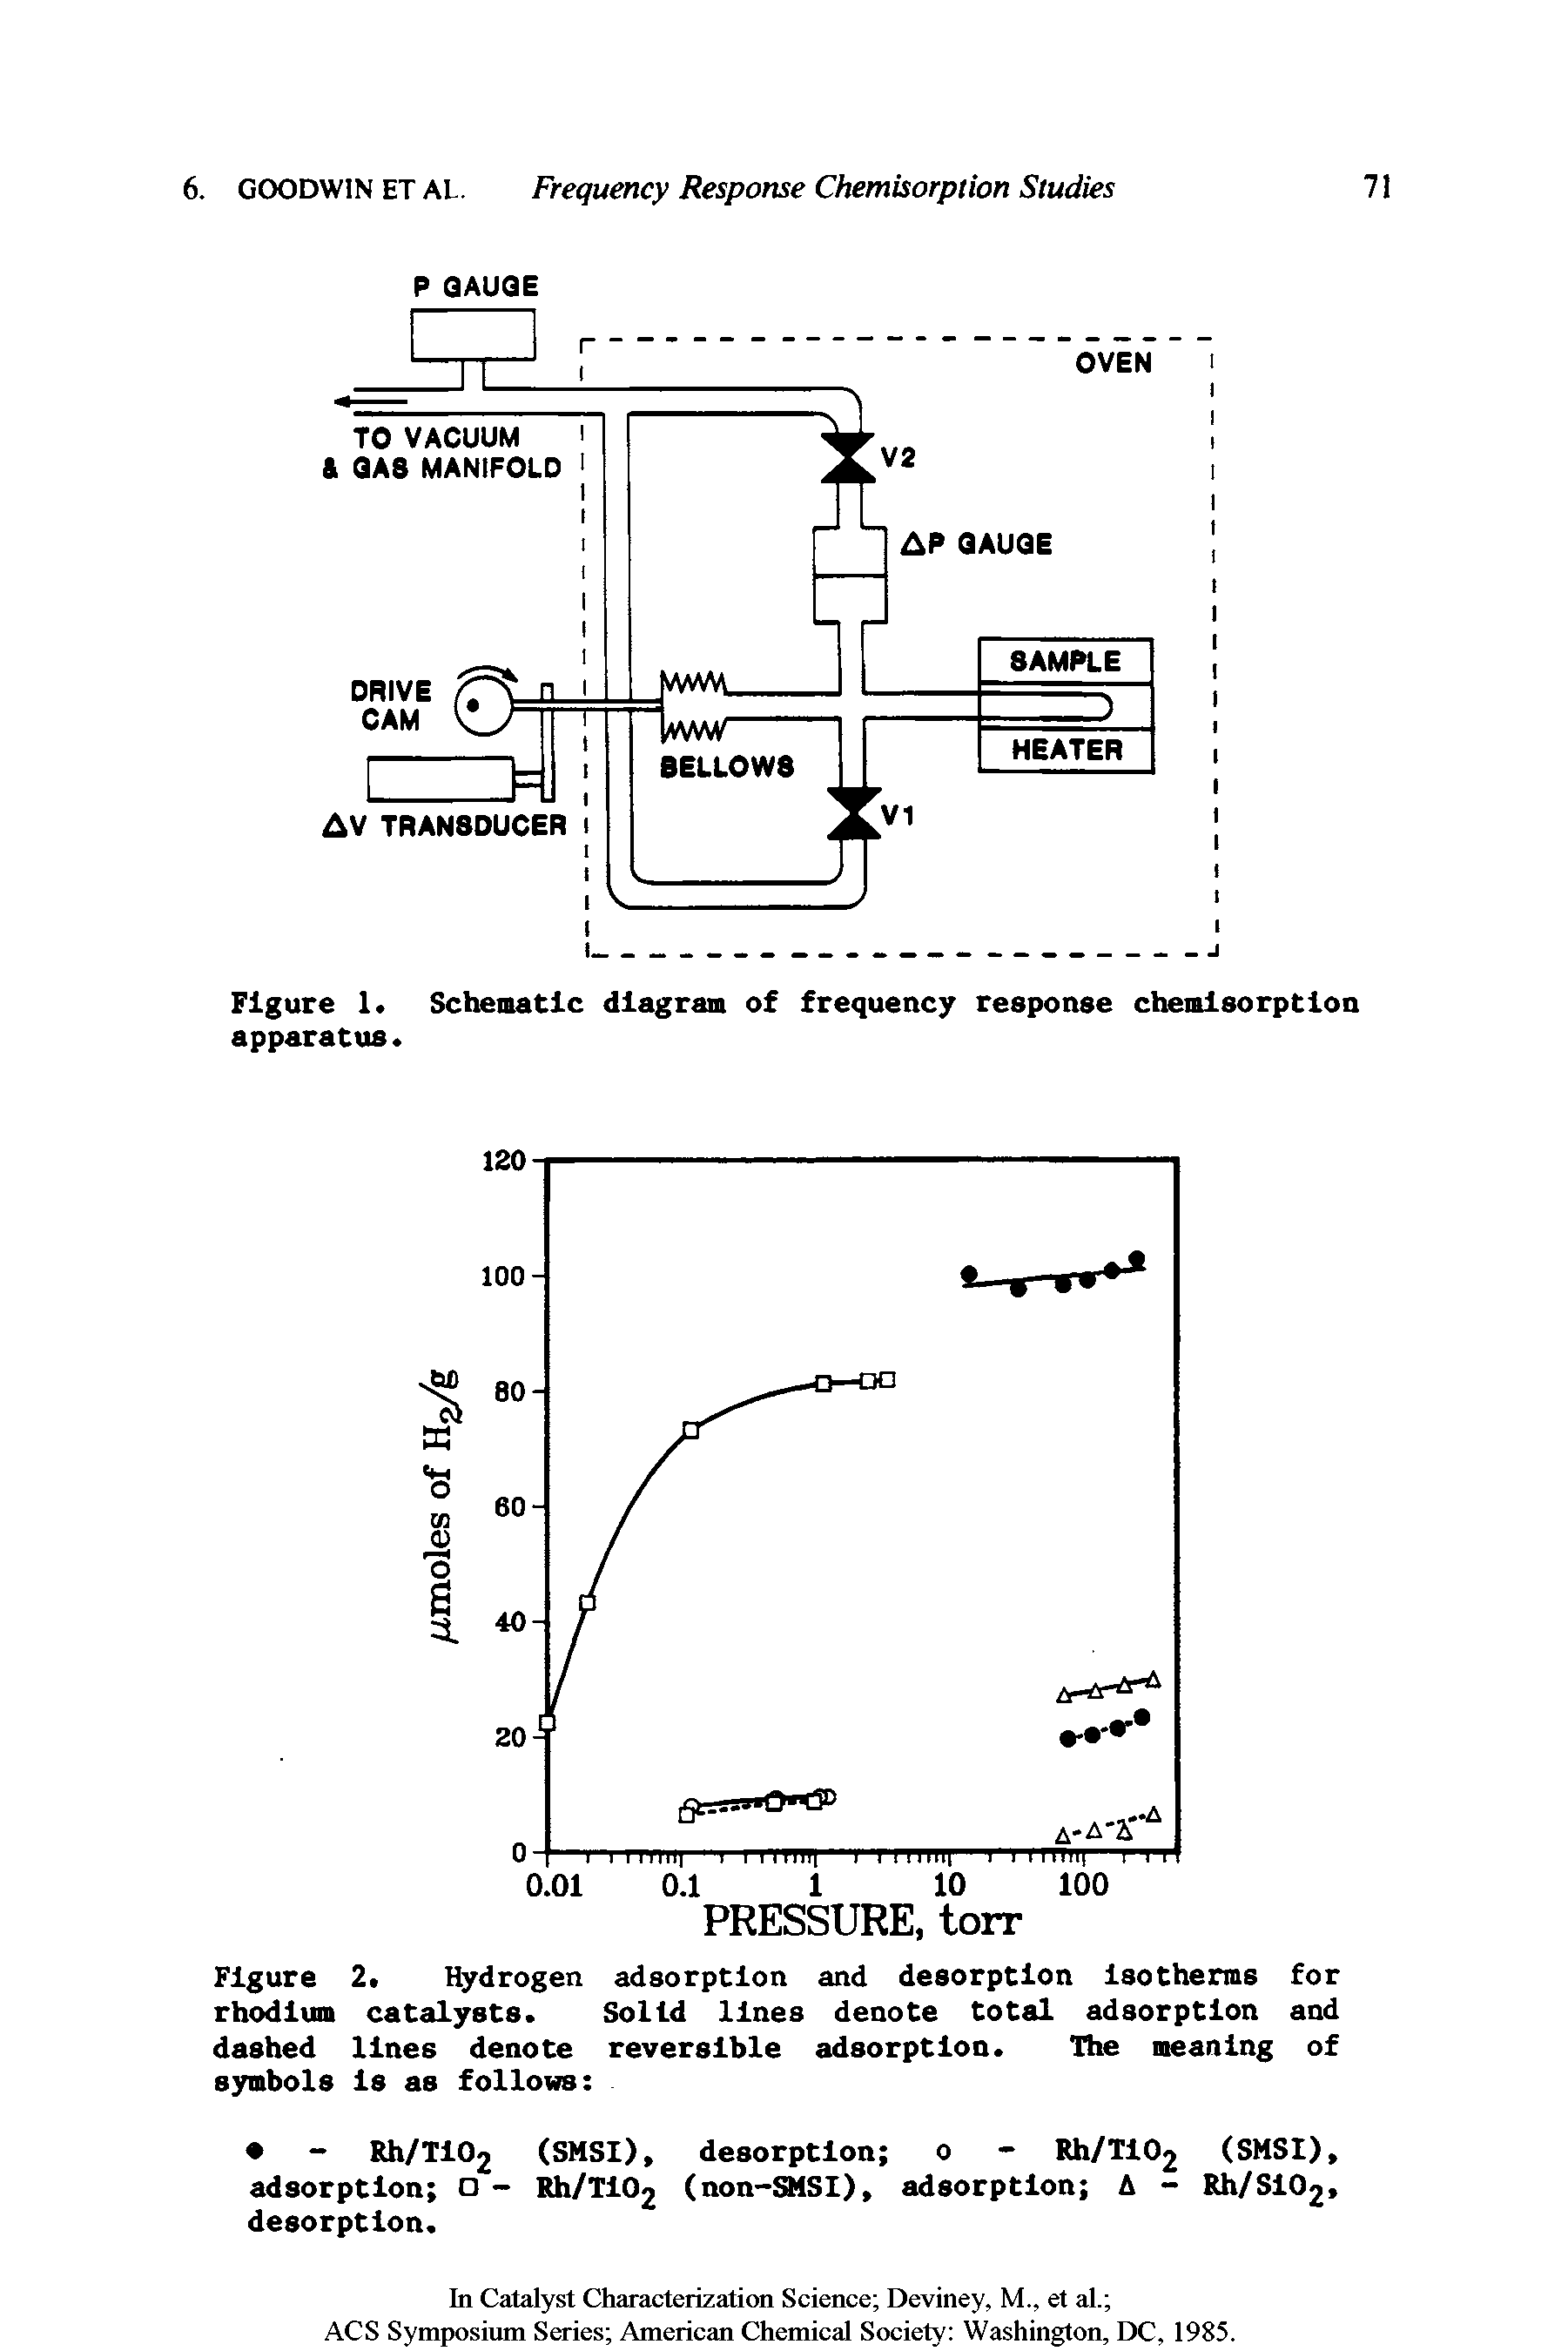 Figure 1. Schematic diagram of frequency response chemisorption apparatus.